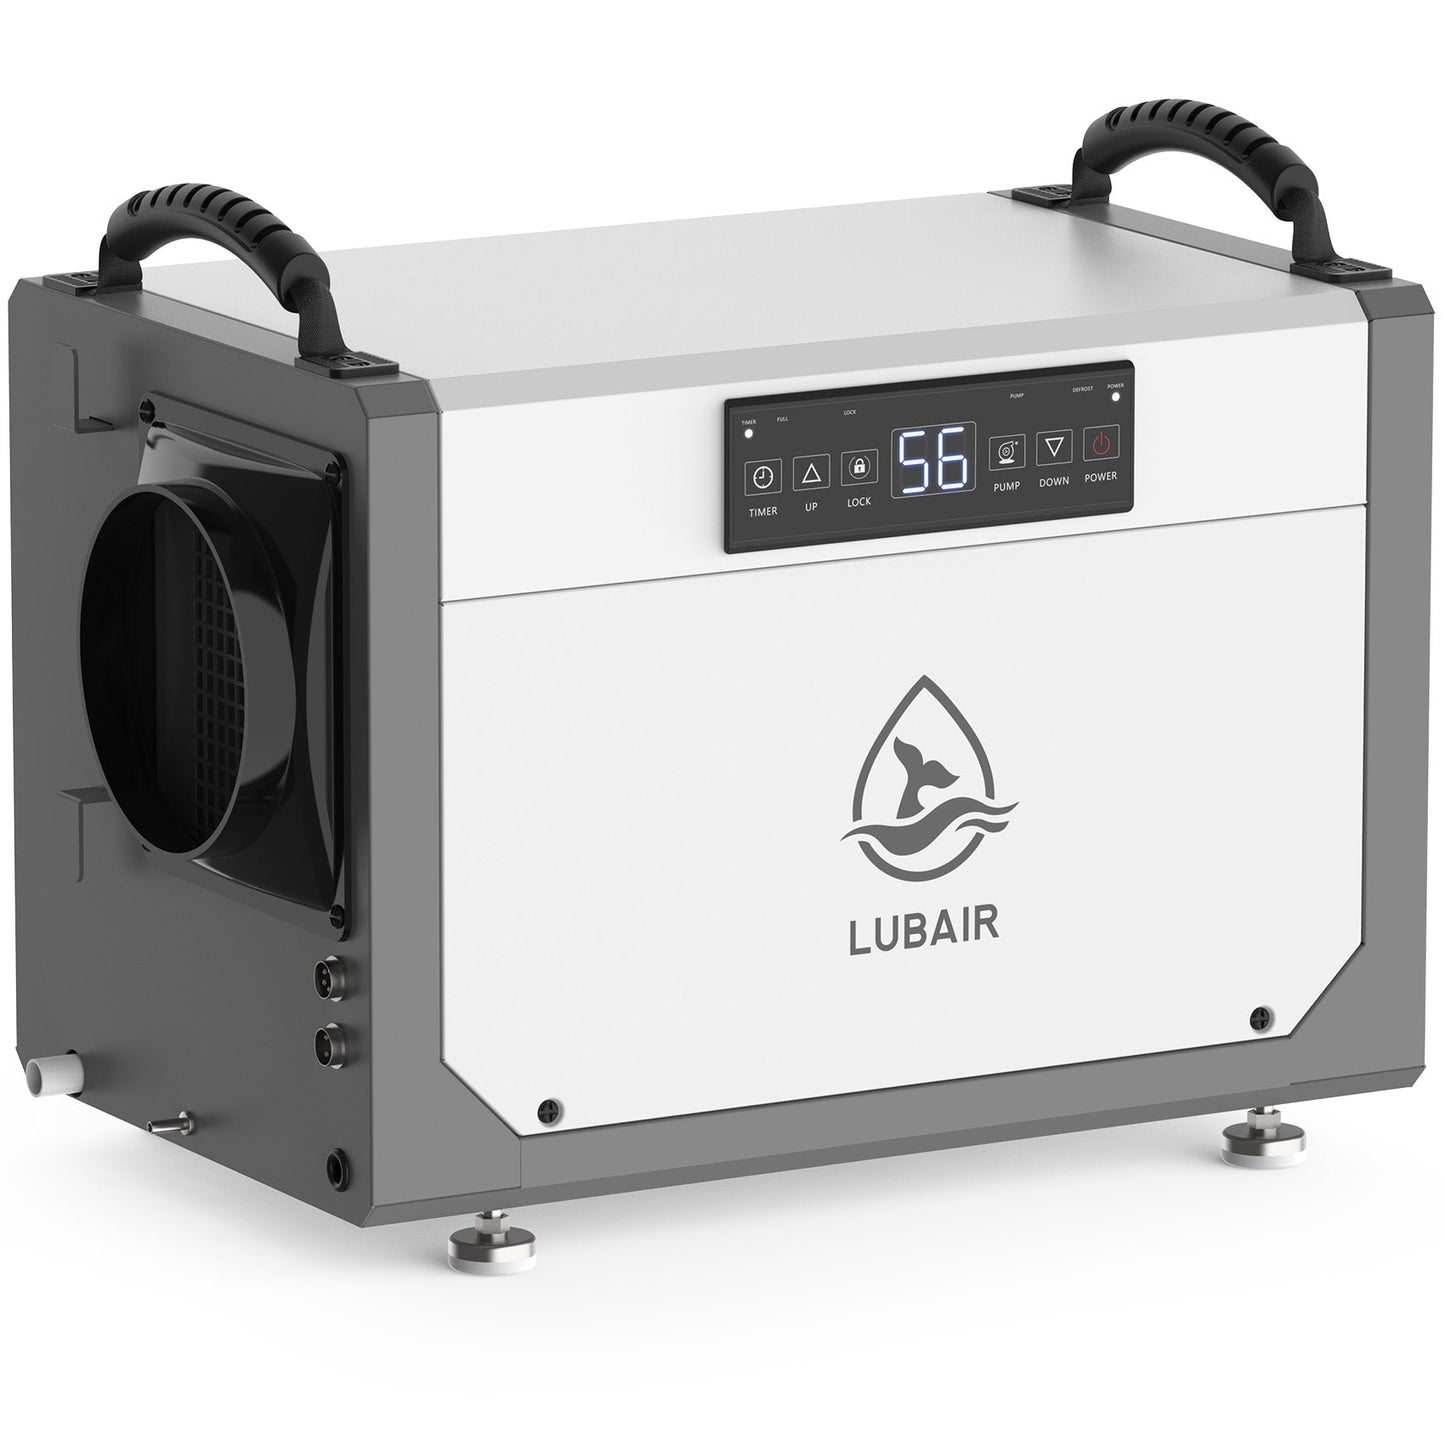 LUBAIR 113 Pints Crawl Space Dehumidifier with Pump, Commercial Dehumidifier with Drainage Hose, Coverage Area 1400 Sq.ft